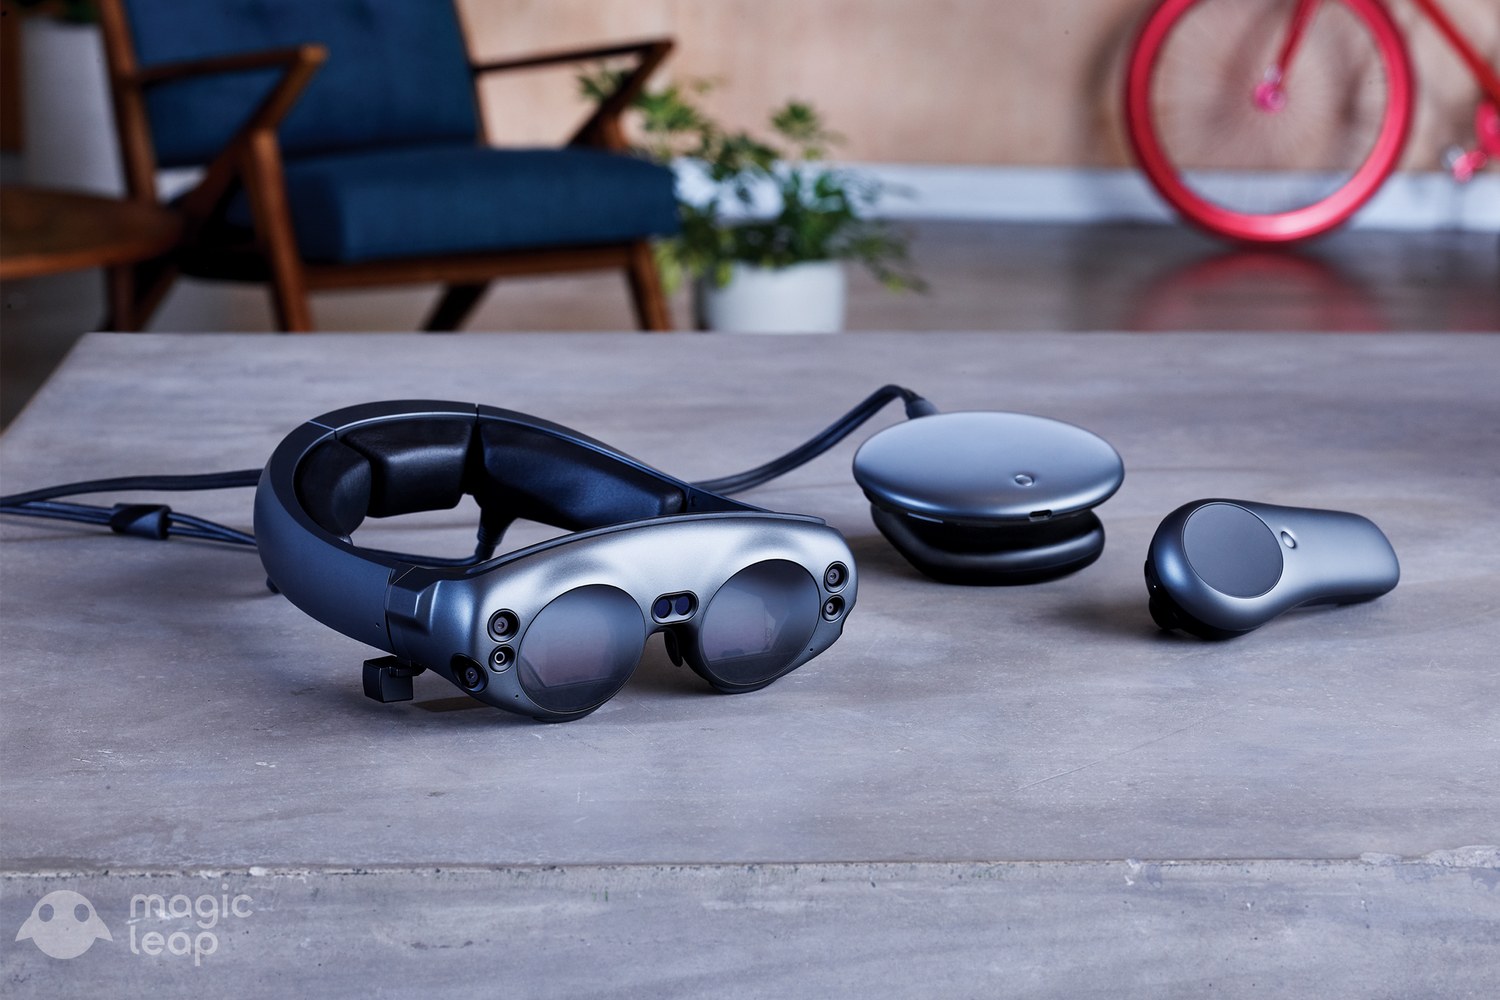 Magic Leap doesn't quite live up to the hype